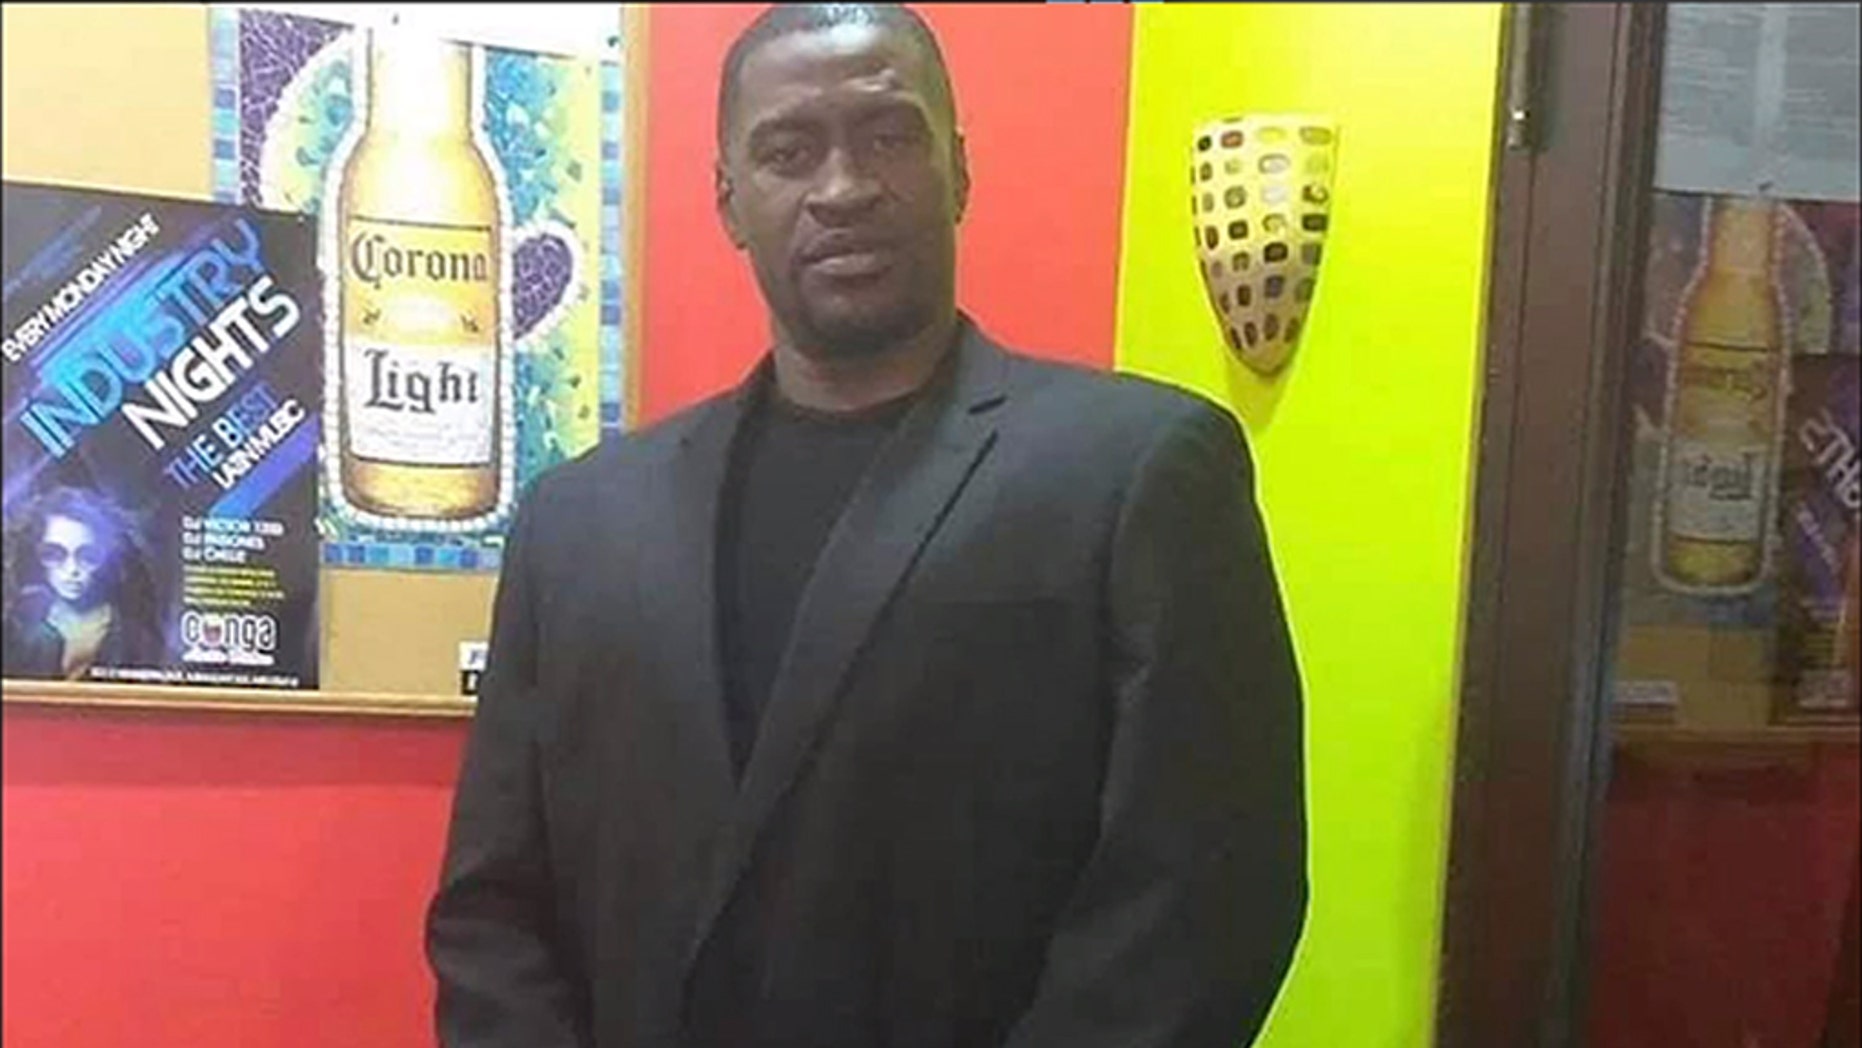 George Floyd died Monday after being detained by Minneapolis police officers. (Courtesy: Benjamin Crump via TMX.news)